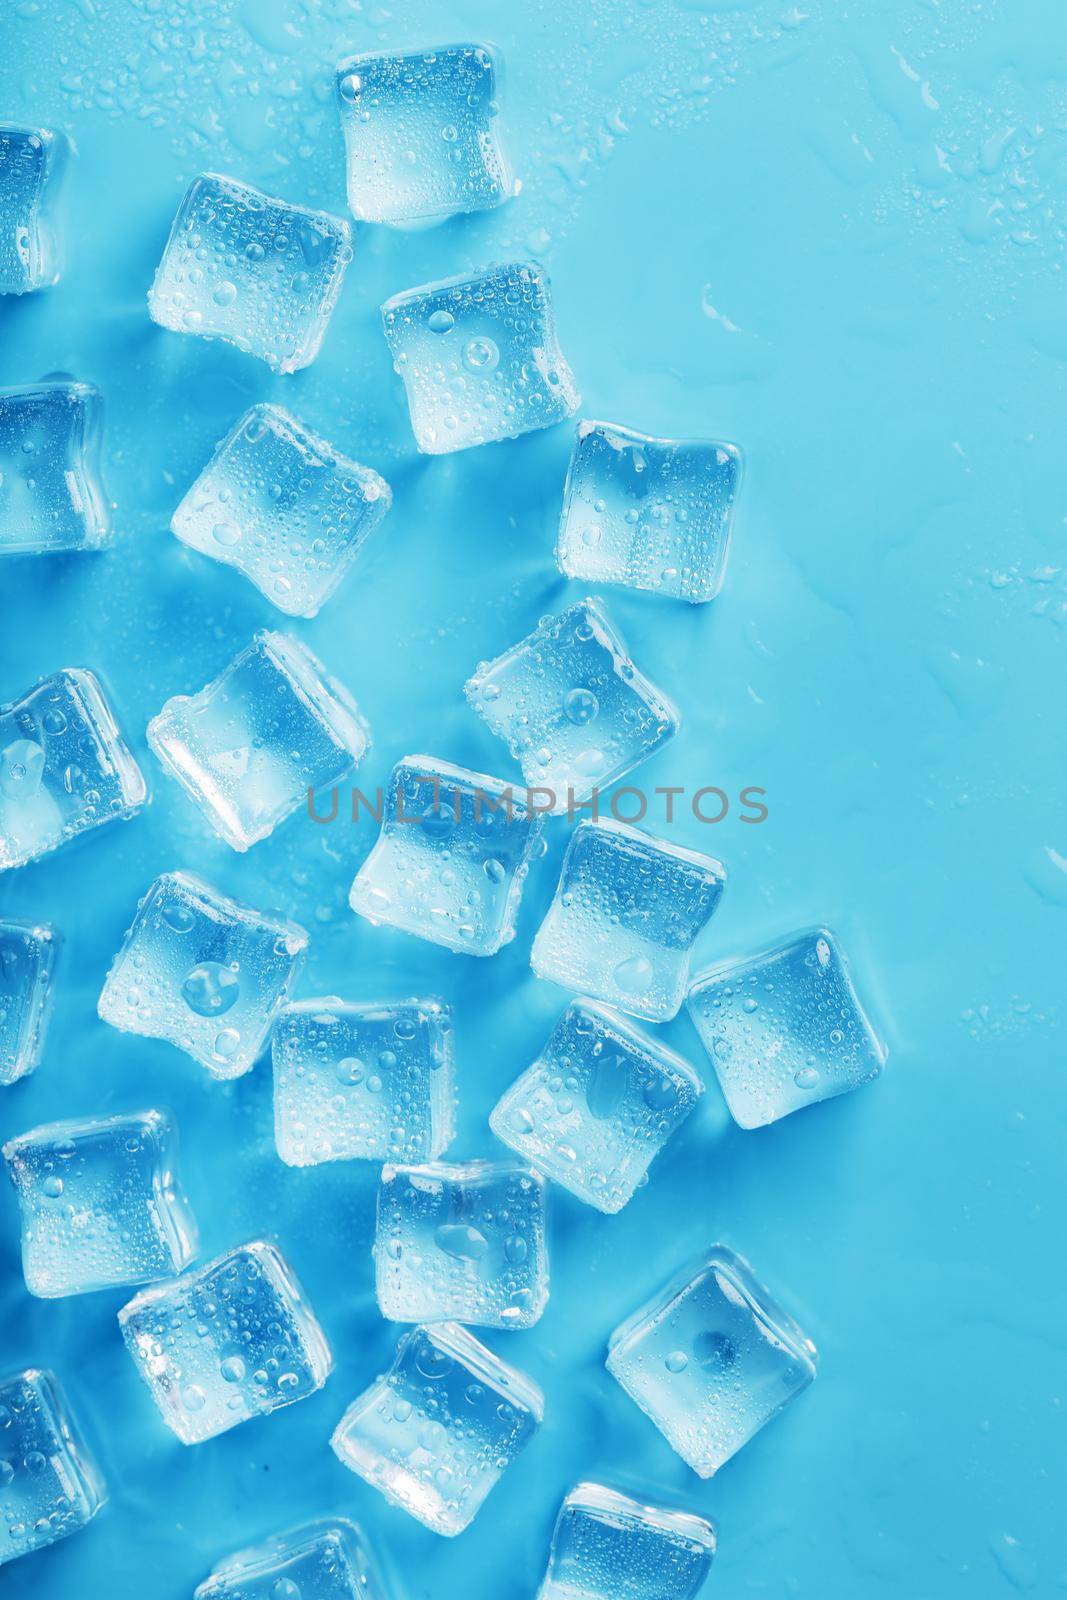 Lots of ice cubes with water drops scattered on a blue background by AlexGrec